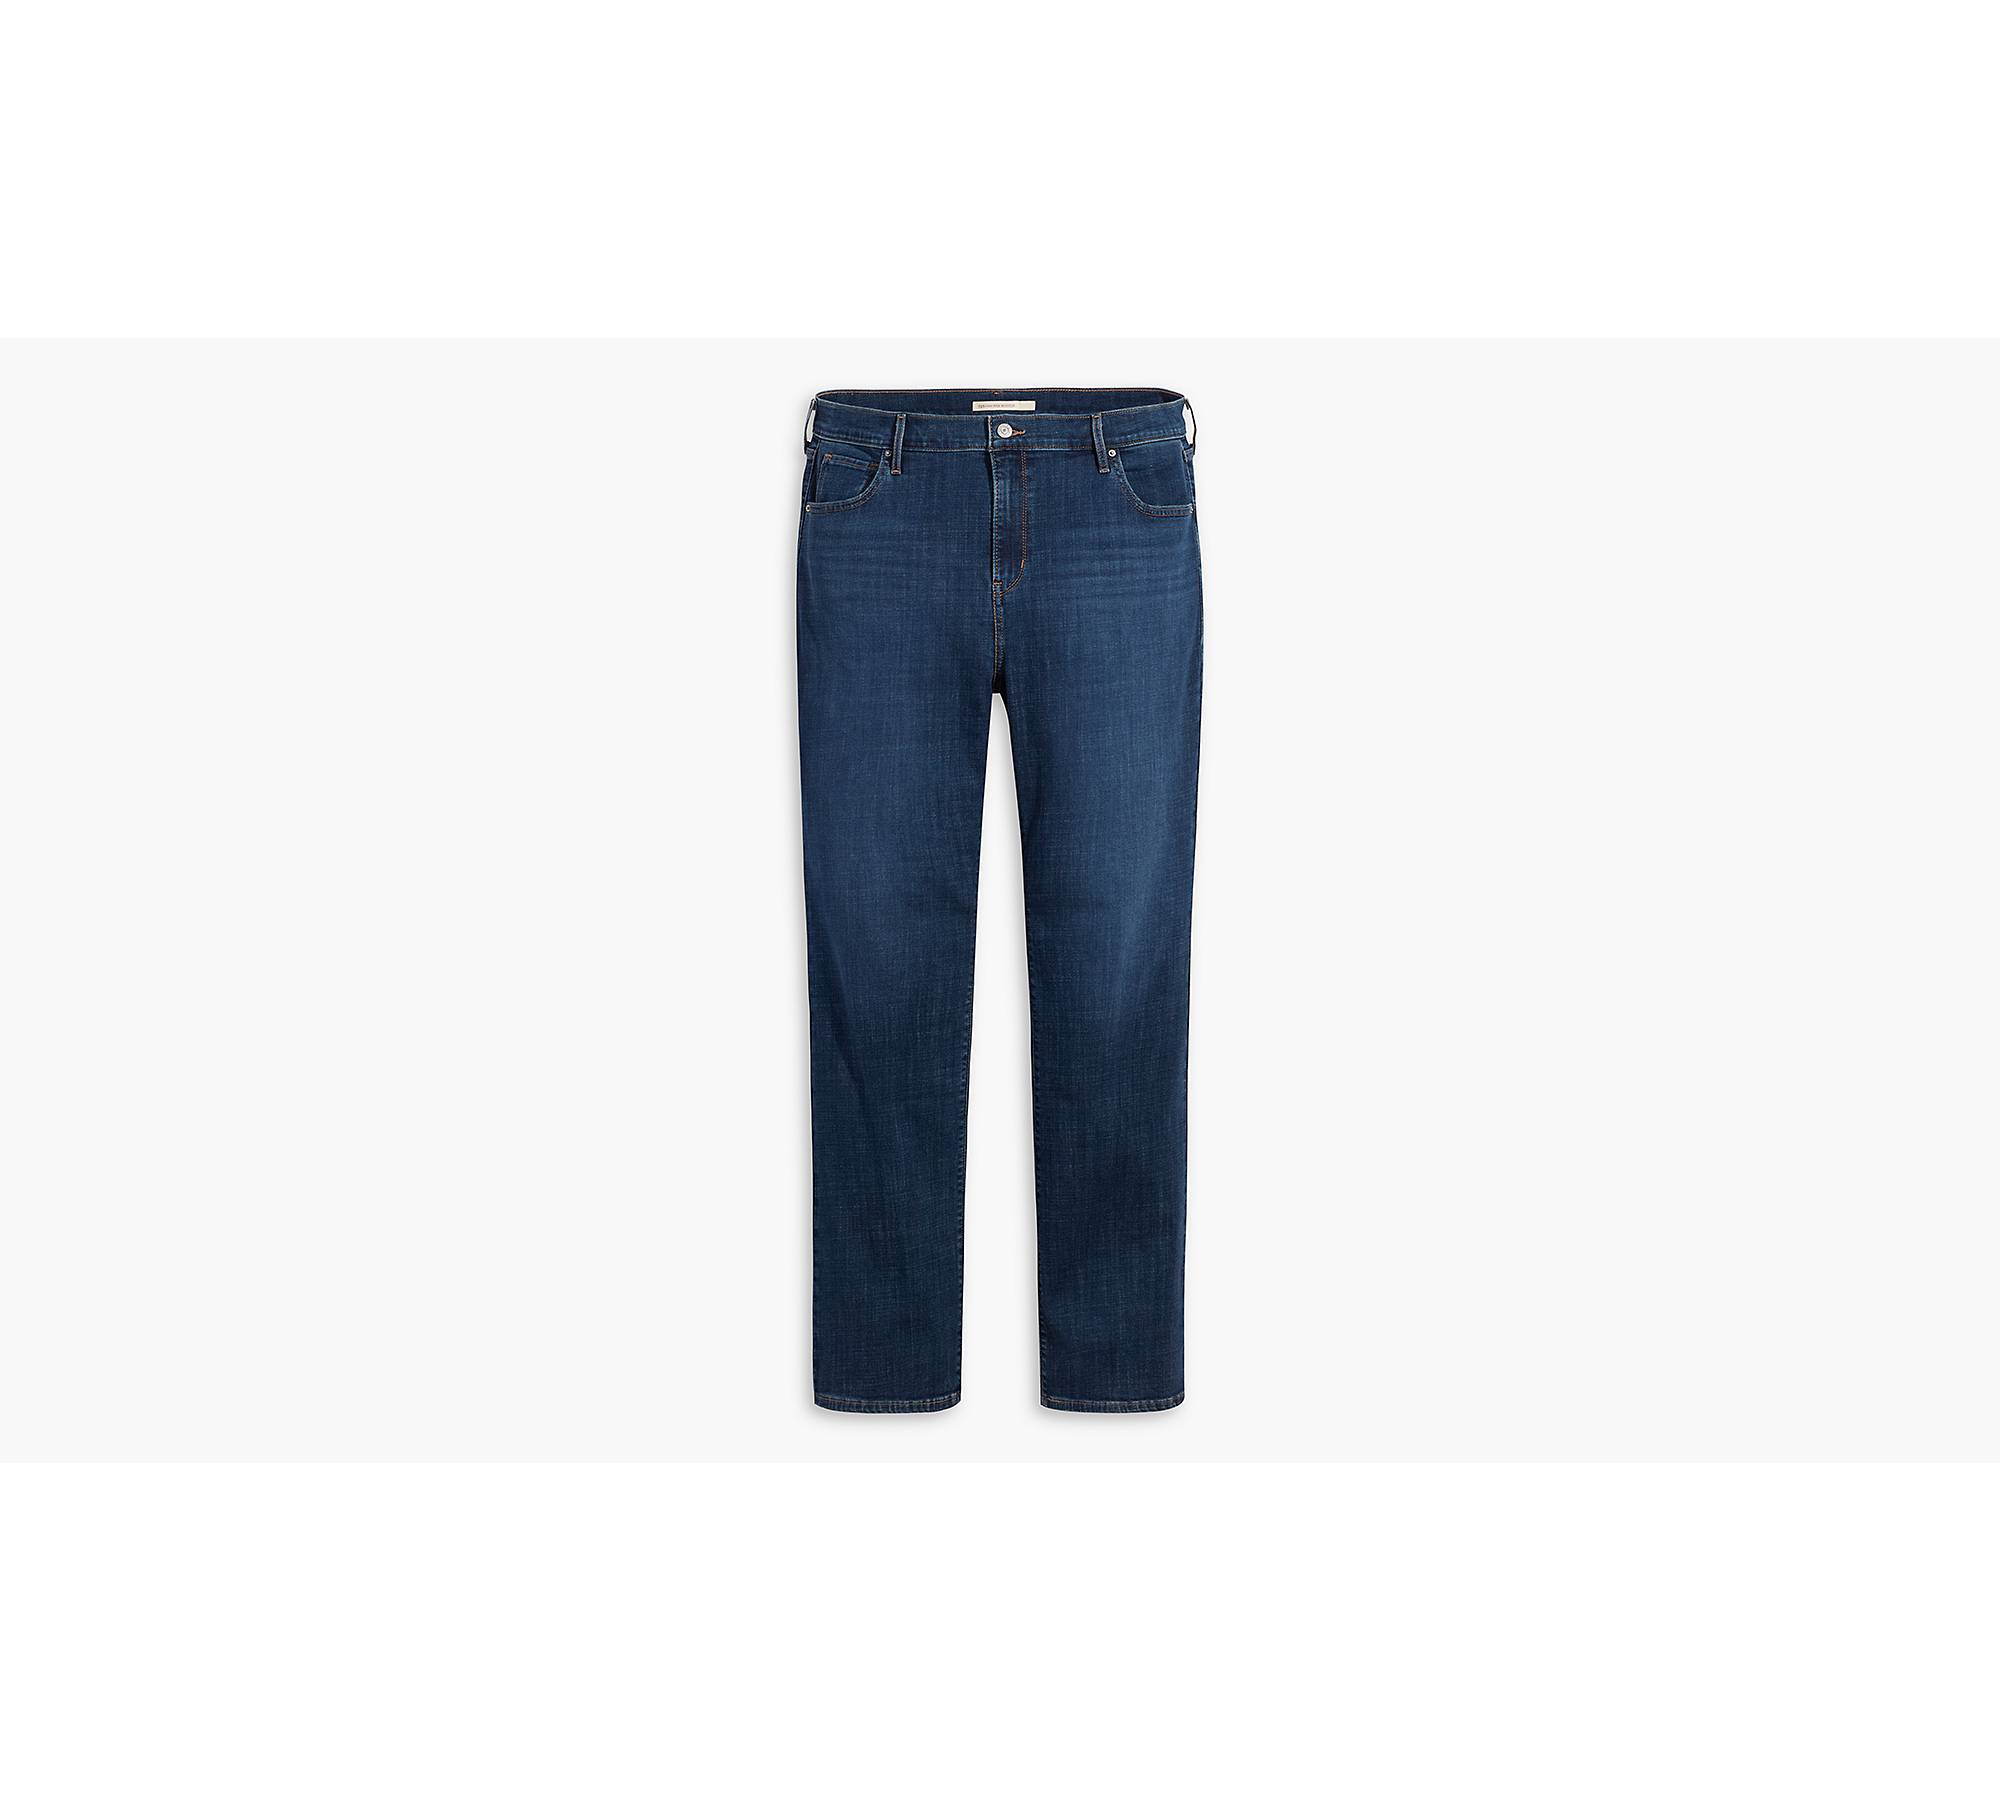 Levi's Women's 725 High Rise Bootcut Jeans (Also Available in Plus